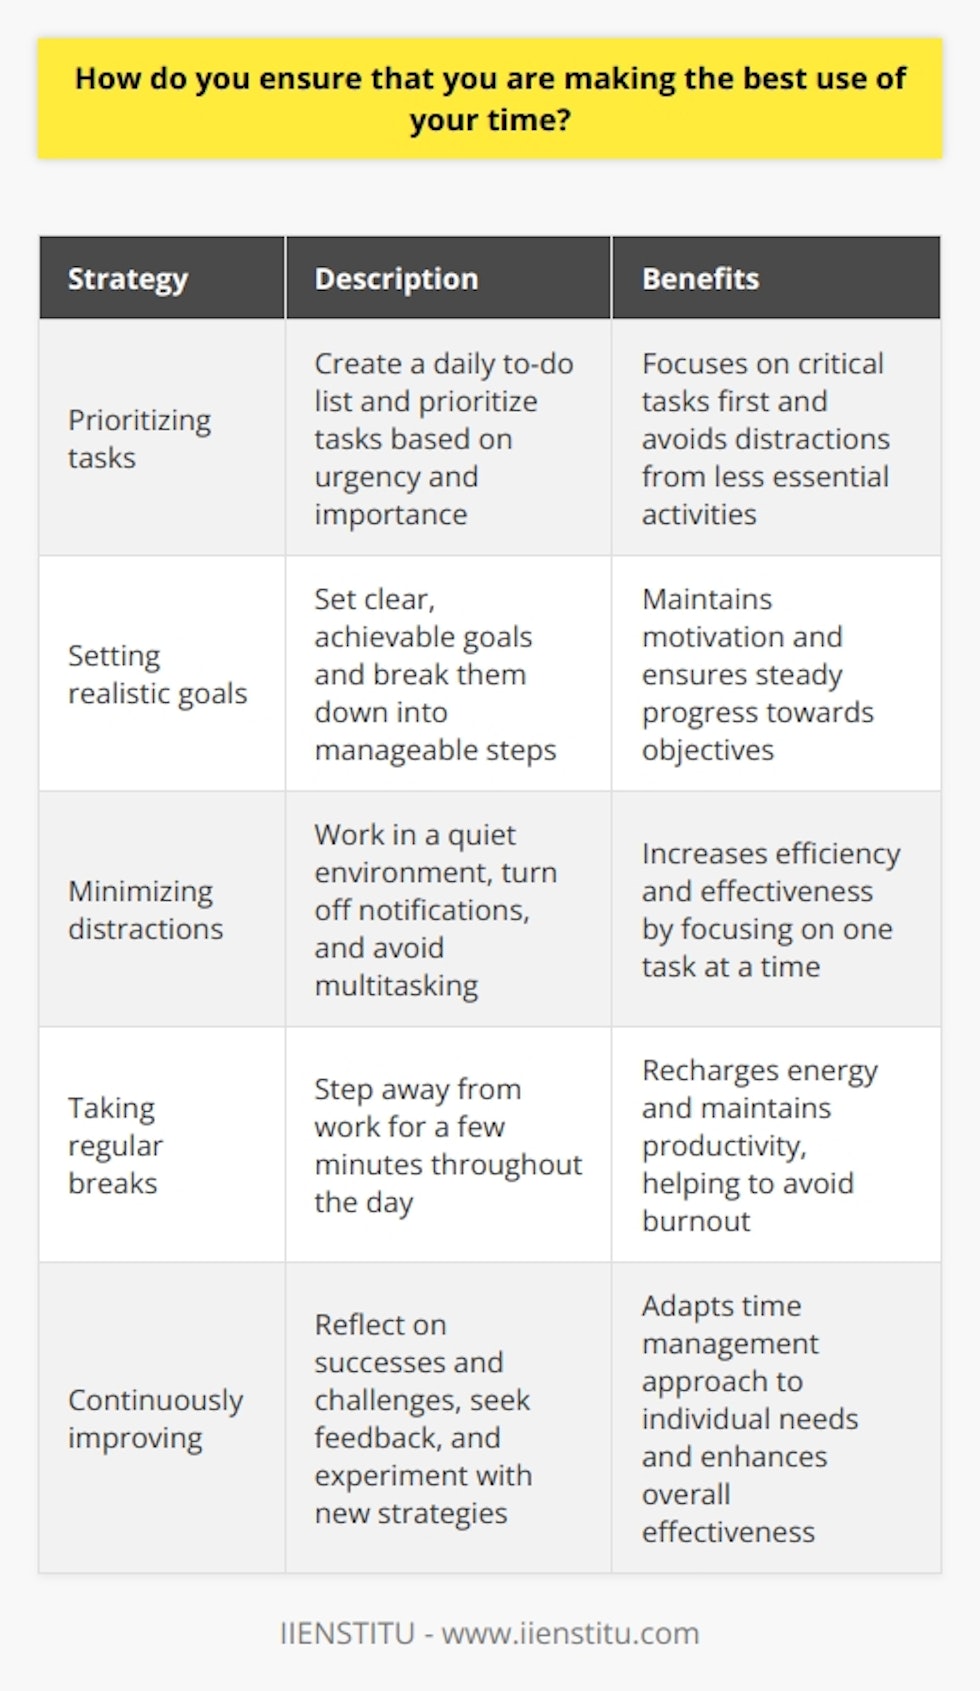 I am a strong believer in effective time management. To ensure that I am making the best use of my time, I follow a few key strategies: Prioritizing tasks Each day, I make a to-do list and prioritize tasks based on urgency and importance. This helps me focus on the most critical tasks first and avoid getting sidetracked by less essential activities. Setting realistic goals I set clear, achievable goals for myself and break them down into smaller, manageable steps. By setting realistic expectations, I can stay motivated and make steady progress towards my objectives. Minimizing distractions I try to minimize distractions by working in a quiet environment, turning off notifications on my devices, and avoiding multitasking. When I focus on one task at a time, I can complete it more efficiently and effectively. Taking regular breaks To maintain my productivity and avoid burnout, I take regular breaks throughout the day. I find that stepping away from my work for a few minutes helps me recharge and return with renewed focus and energy. Continuously improving I am always looking for ways to improve my time management skills. I reflect on my successes and challenges, seek feedback from others, and experiment with new strategies to find what works best for me. By following these strategies, I am able to make the most of my time and achieve my goals more efficiently. Time management is an ongoing process, but I am committed to continuously improving and adapting my approach as needed.